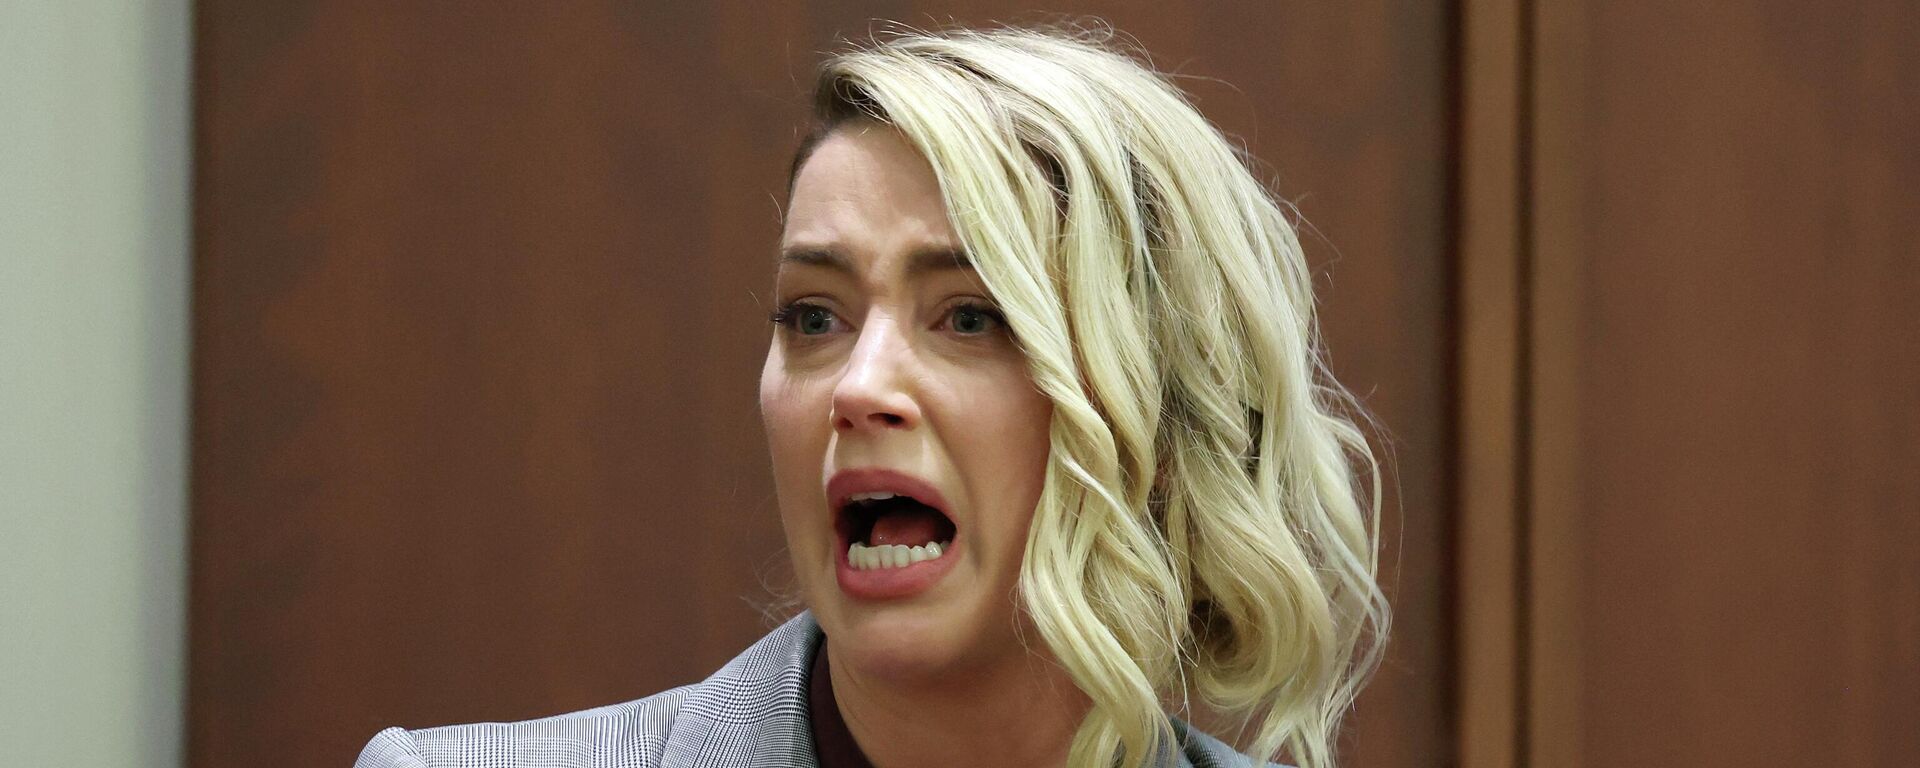 (FILES) In this file photo taken on May 26, 2022, US actor Amber Heard testifies during the Depp vs Heard defamation trial at the Fairfax County Circuit Court in Fairfax, Virginia. - Sputnik International, 1920, 03.06.2022